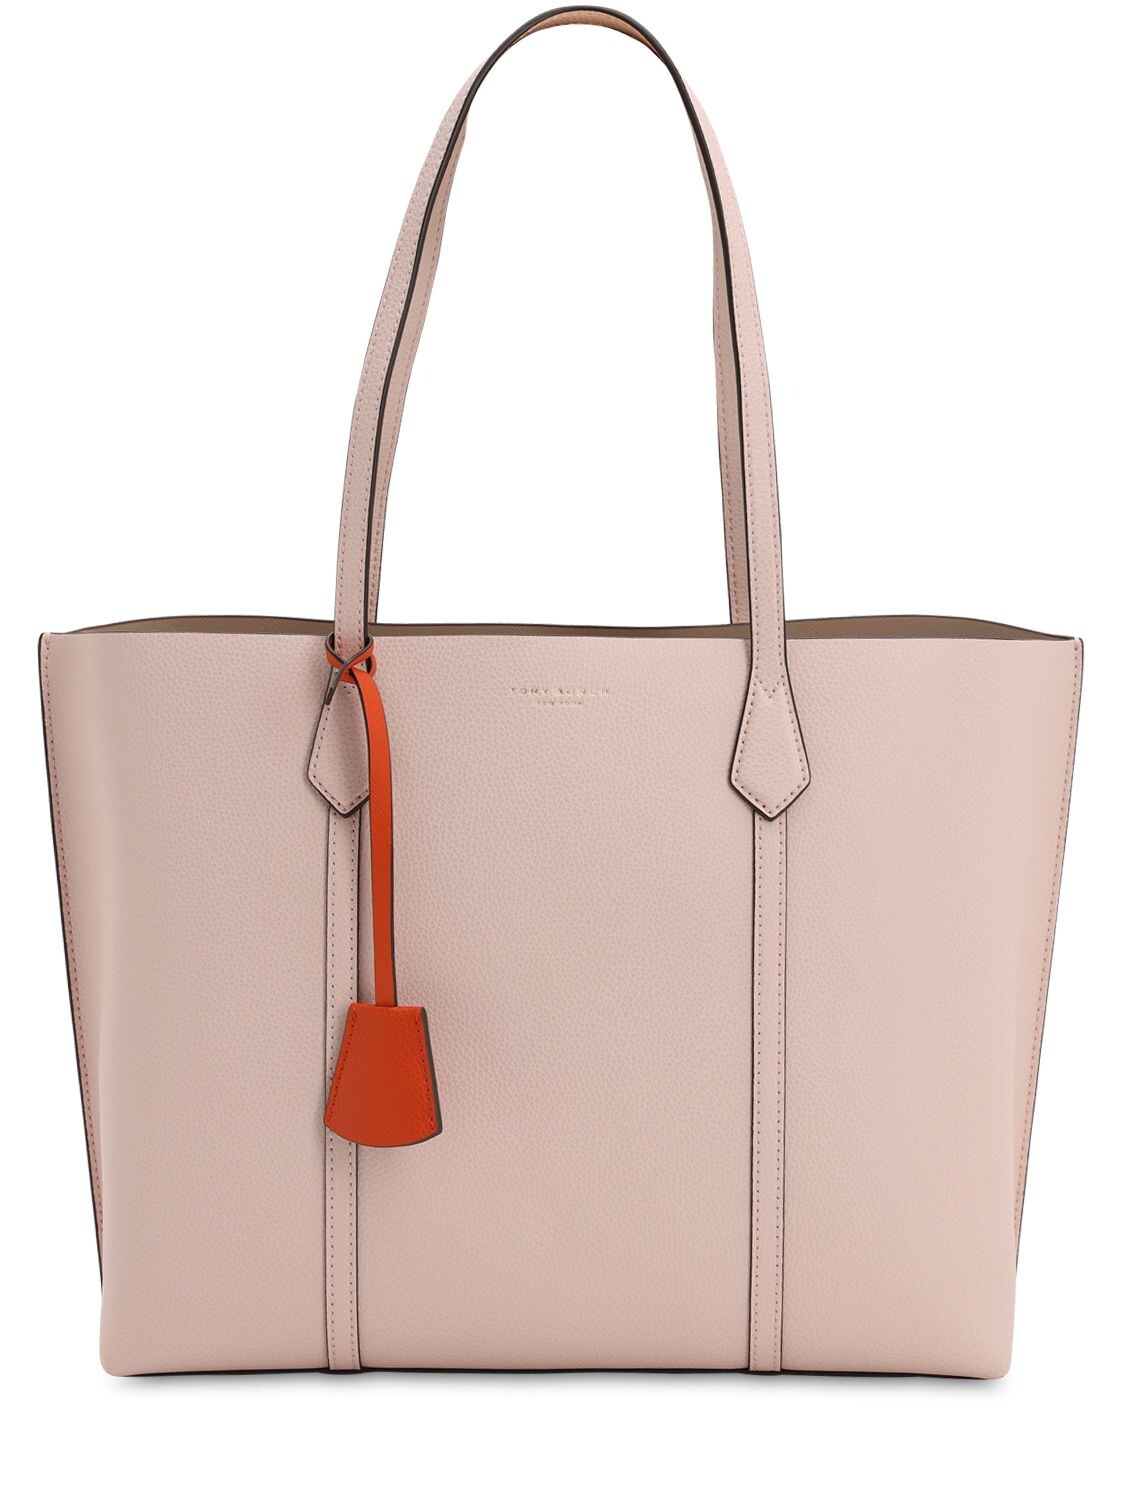 Tory Burch Perry Multicolor Leather Tote Bag In Pink